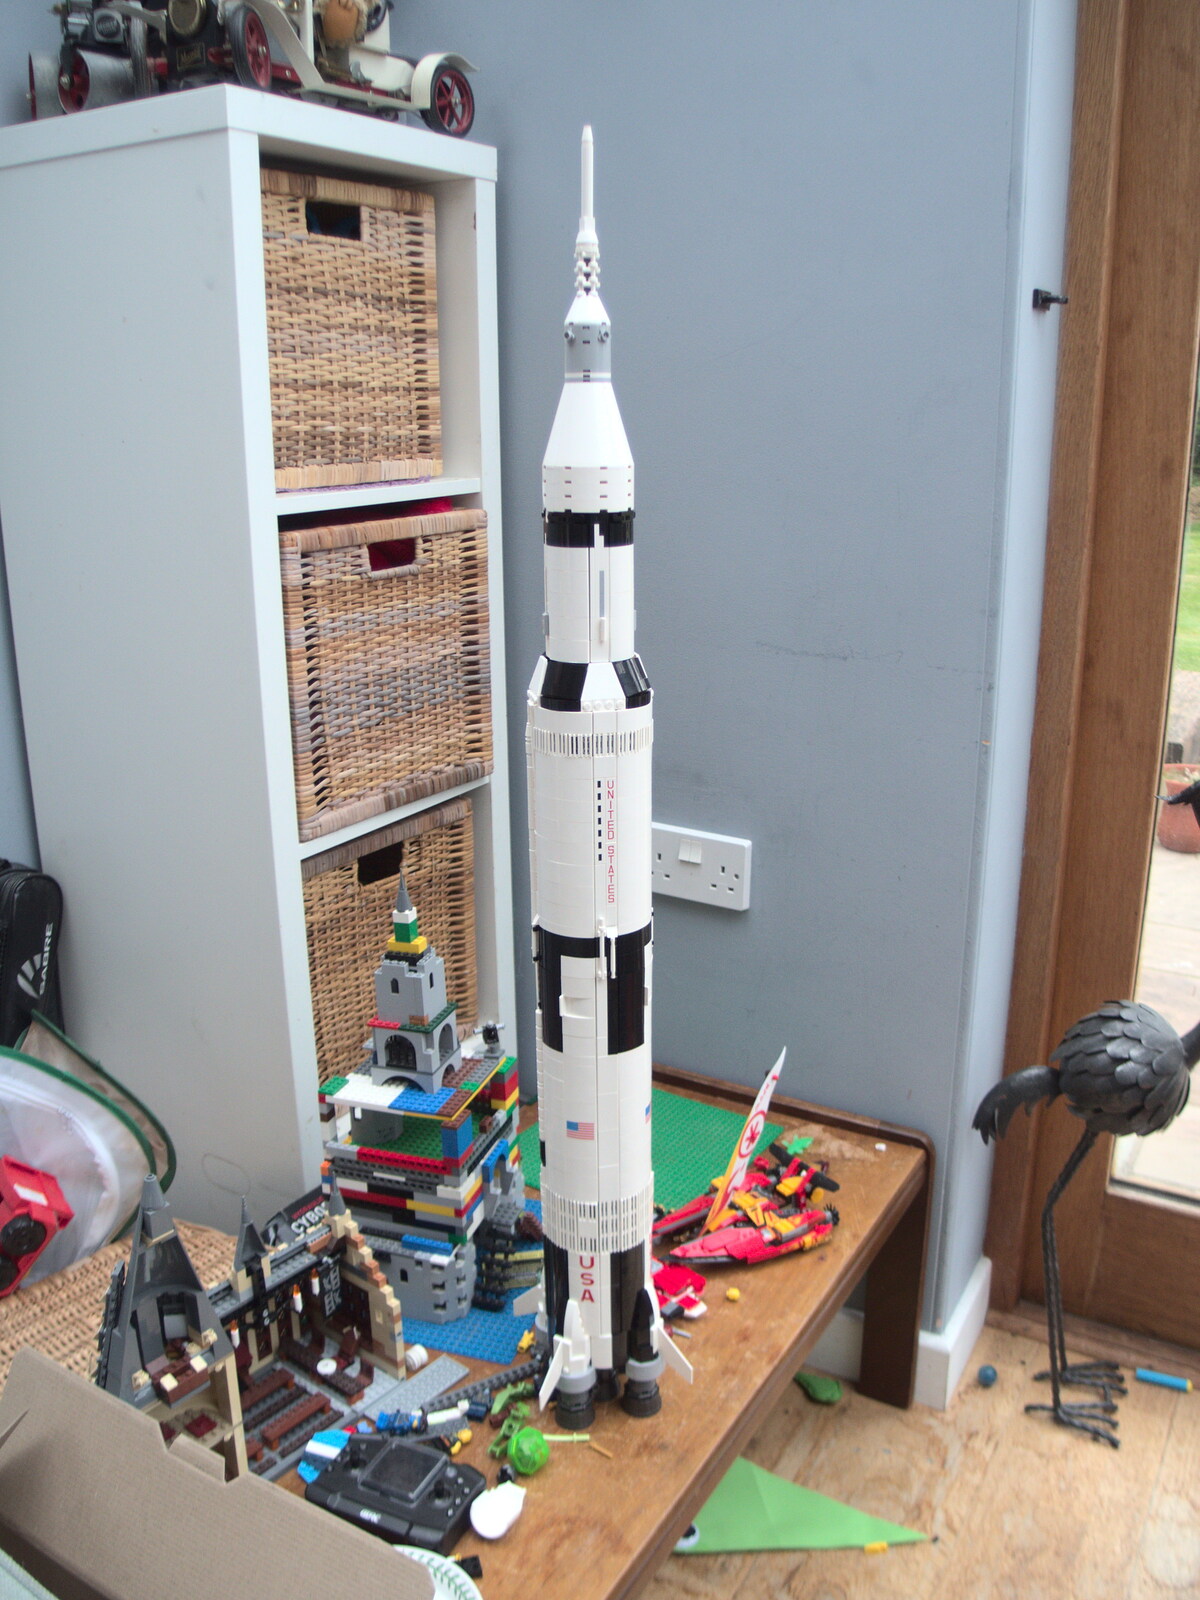 Fred's awesome Saturn V is finished from A BSCC Ride to Pulham Market, Norfolk - 17th June 2021